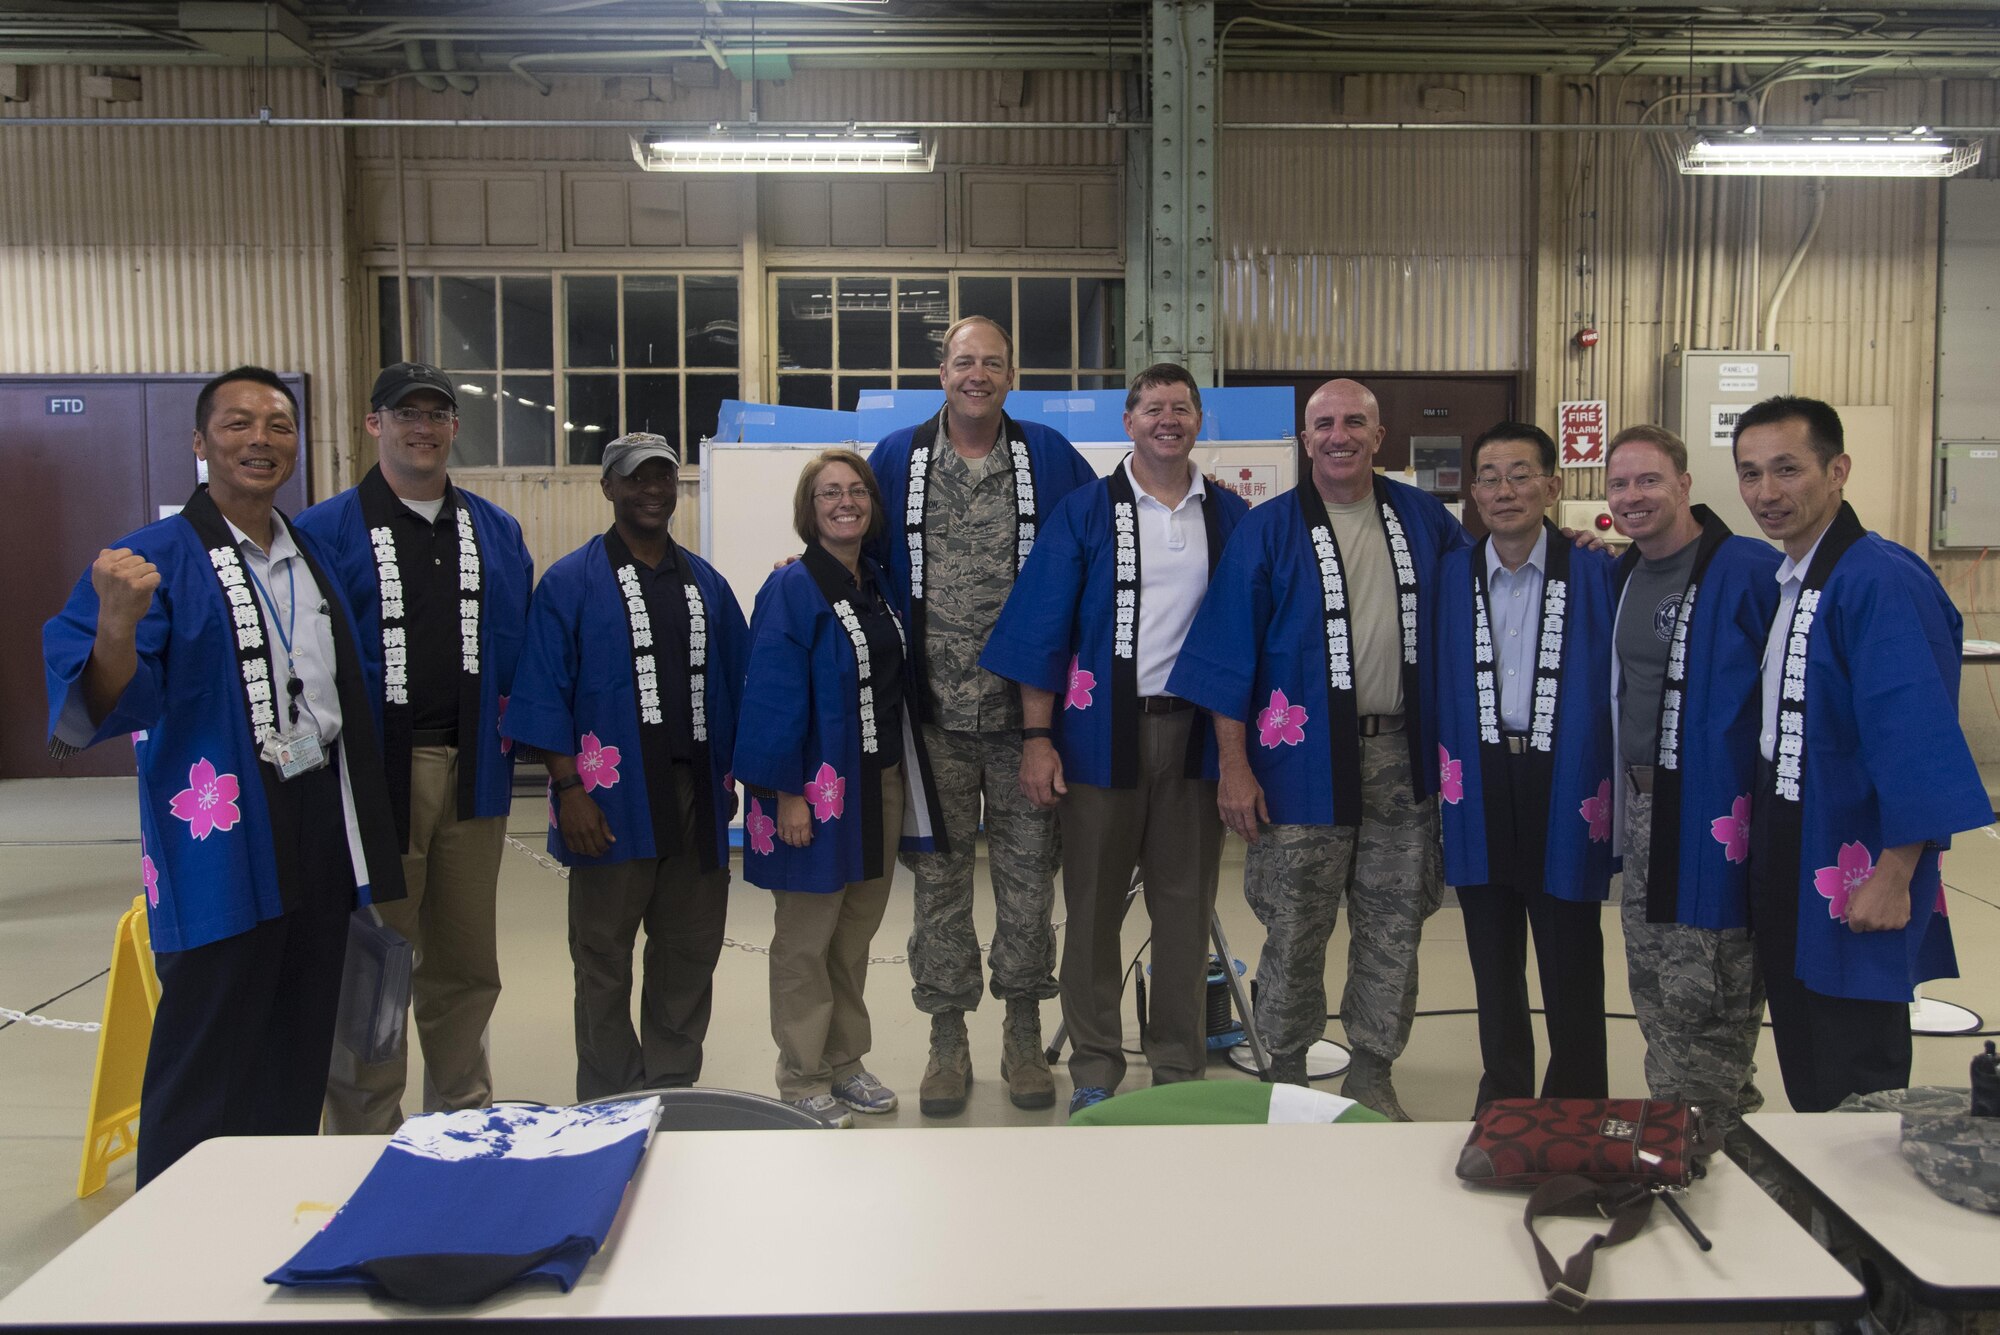 (Fourth from right) Col. Kenneth Moss, 374th Airlift Wing commander, poses with other Yokota leadership before participating in a Bon dance during the 2016 Friendship Festival at Yokota Air Base, Japan, Sept. 18, 2016. The Friendship Festival is a two-day bilateral event aimed at enhancing the United States and Japanese relationship. (U.S. Air Force photo by Staff Sgt. Michael Washburn/Released)